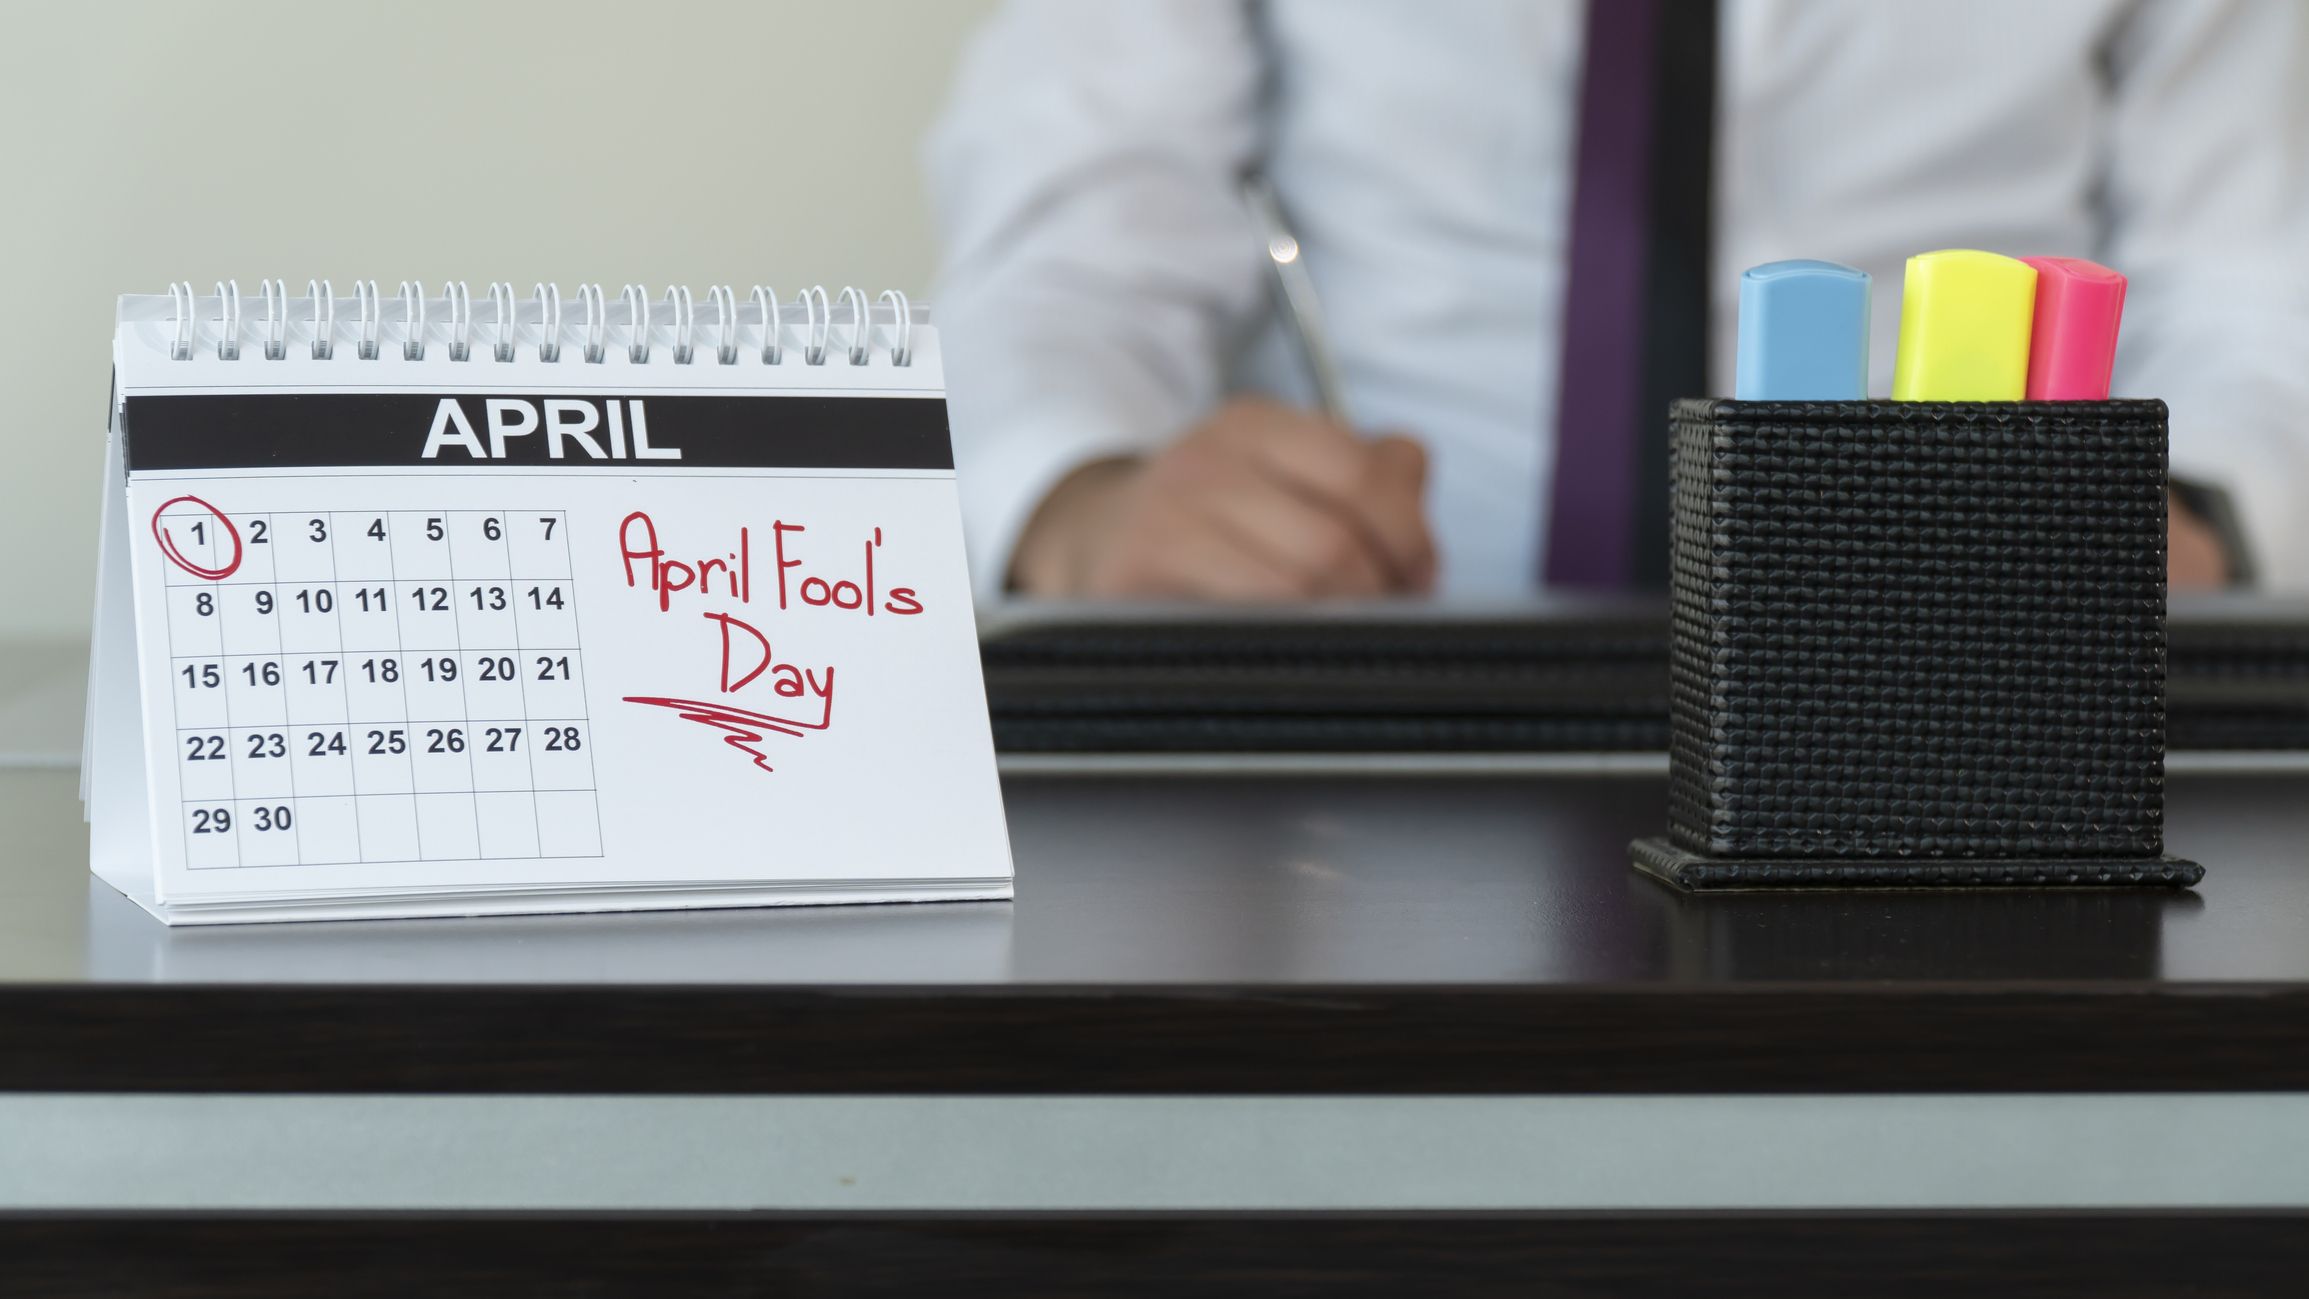 25 Best April Fools' Pranks for Family and Friends